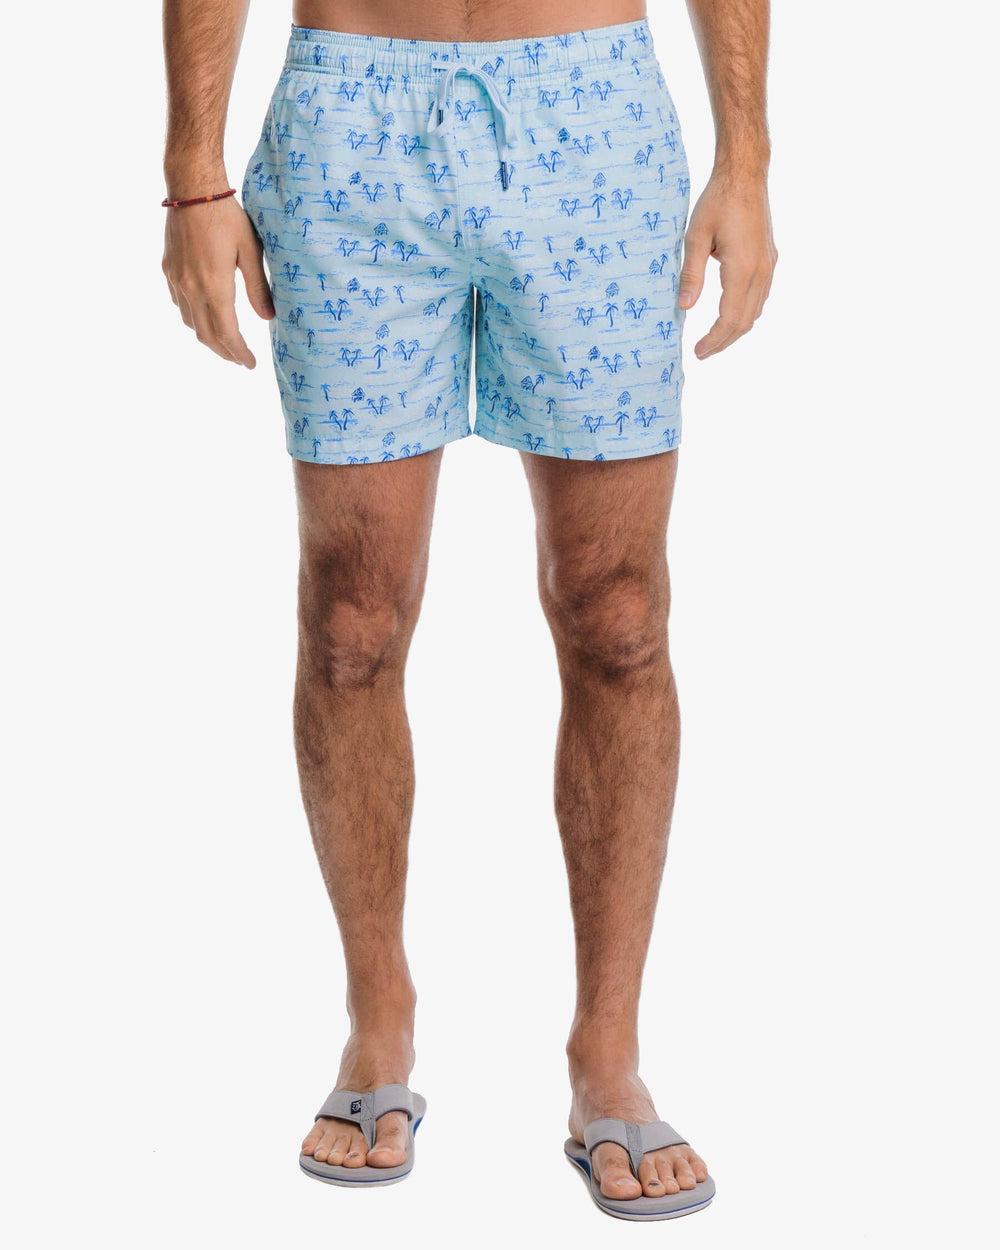 The front view of the Southern Tide Nice to Sea You Printed Swim Trunk by Southern Tide - Baltic Teal